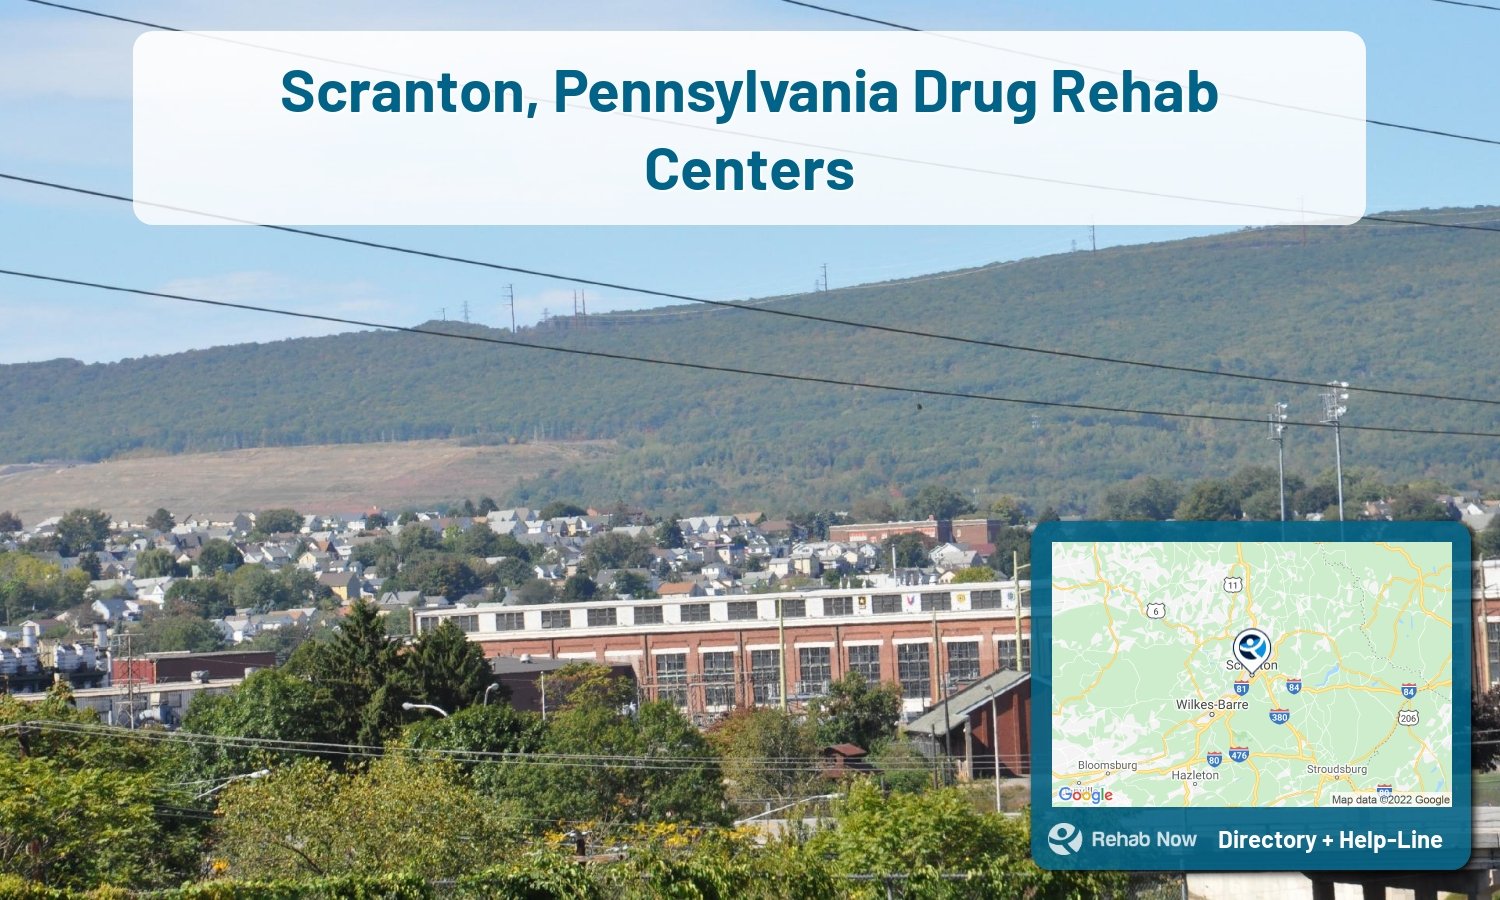 Scranton, PA Treatment Centers. Find drug rehab in Scranton, Pennsylvania, or detox and treatment programs. Get the right help now!